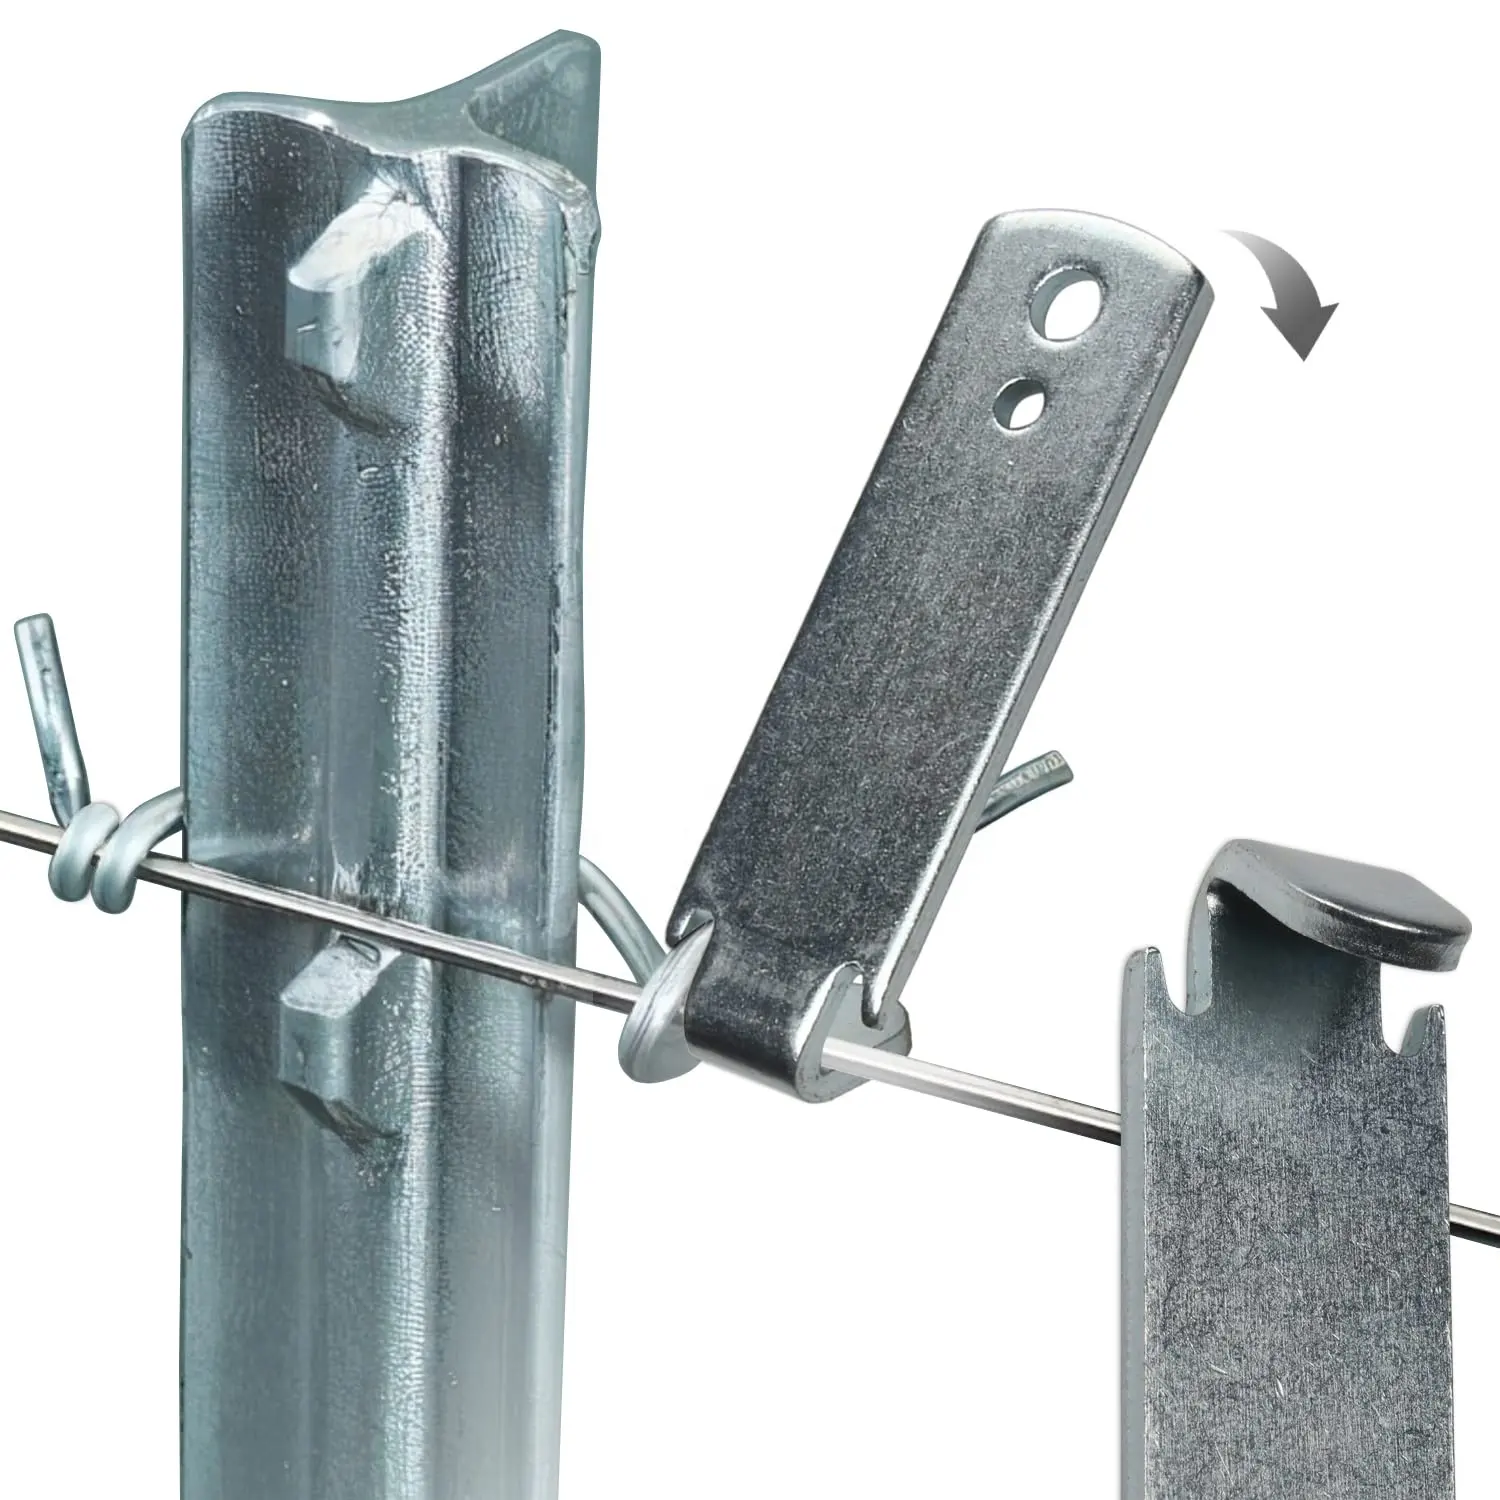 Fence Wire Twister For T Post Clips Time Saver Barb Wire Fence Tools Easy To Use Strong Enough To Twist Any Fencing Wire